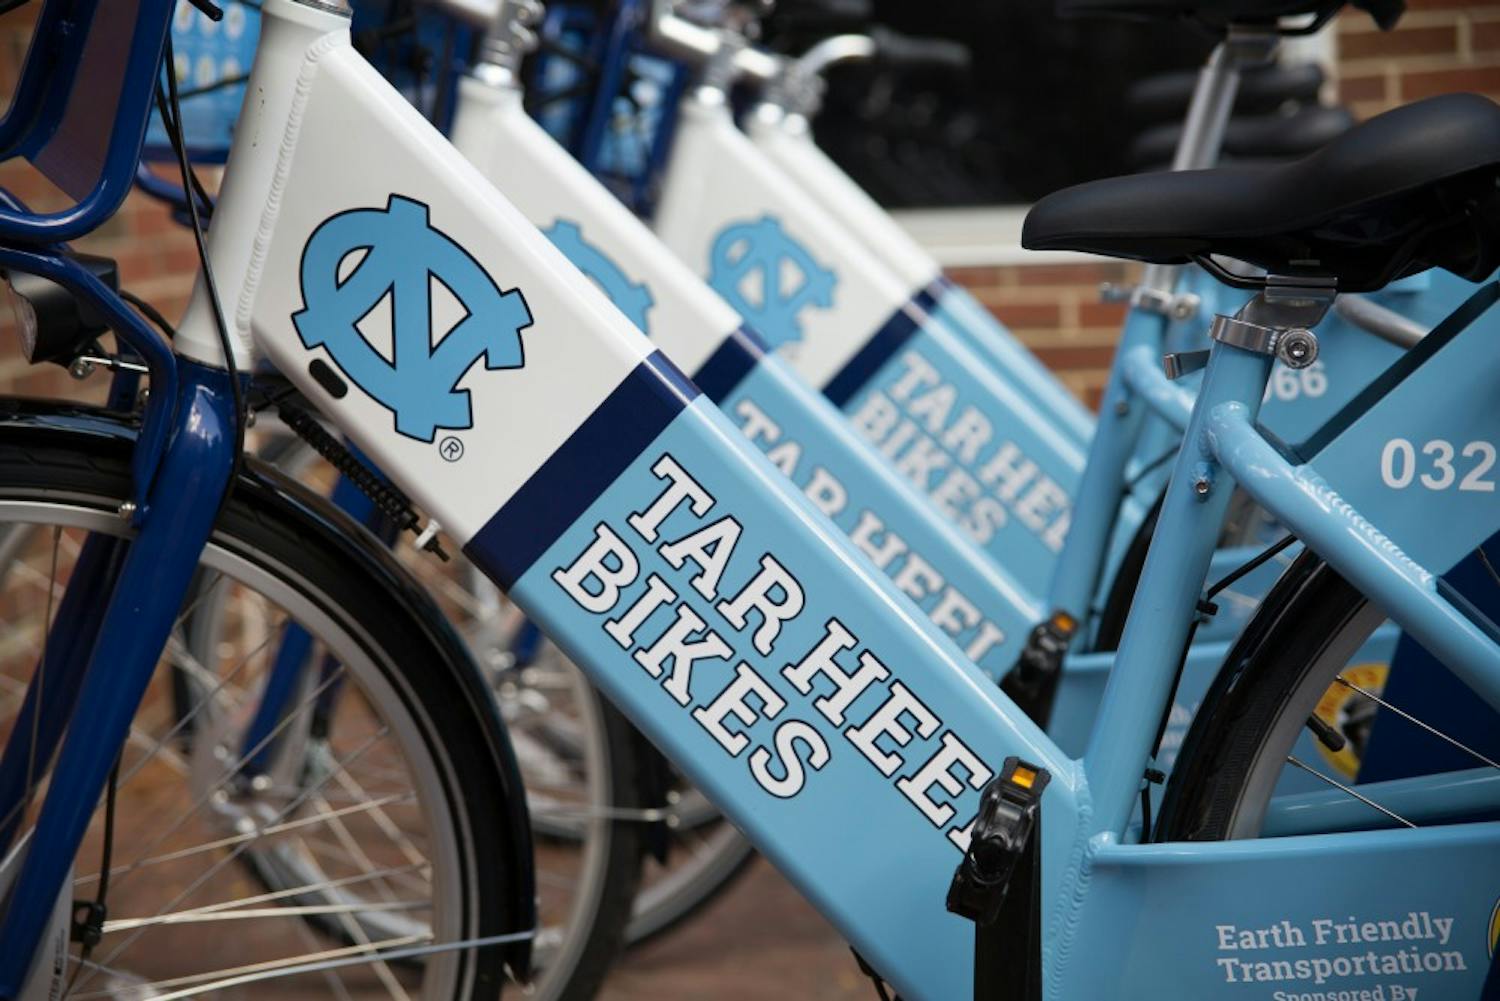 The "Tar Heels Bikes" bike share program was launched by Chancellor Folt and Associate Vice Chancellor of Campus Enterprises Brad Ives in front of Davis Library on Wednesday.